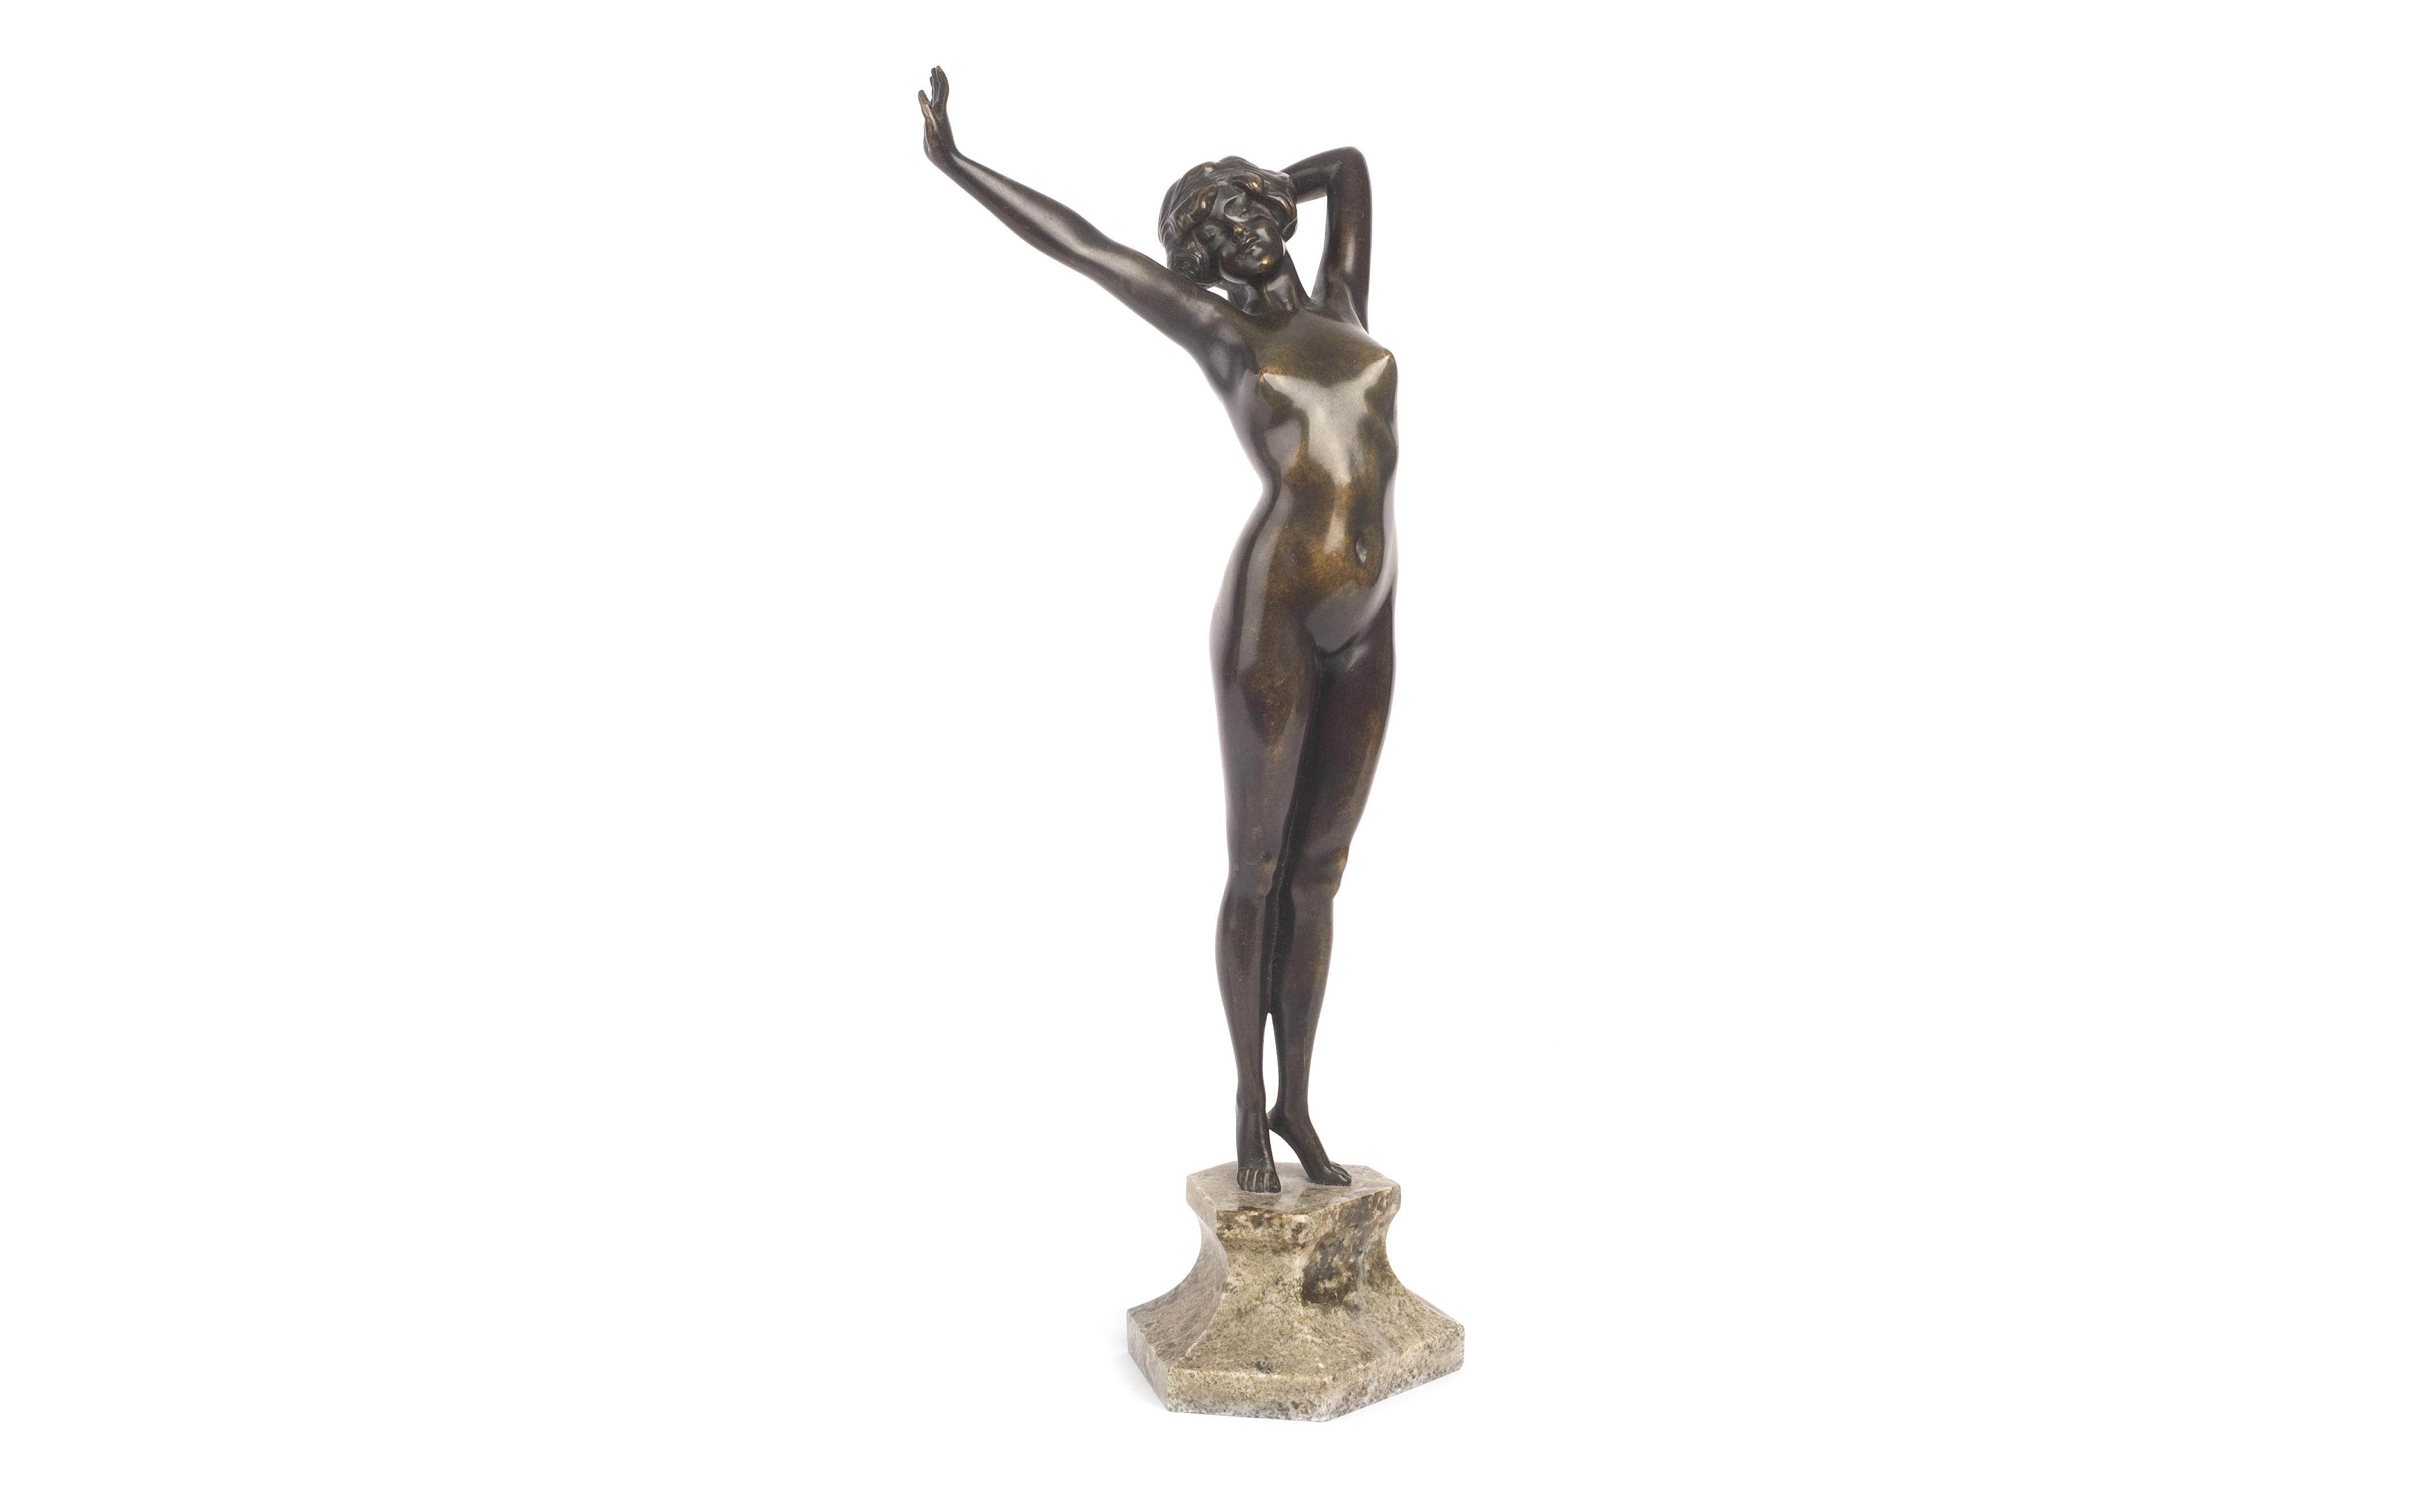 ATTRIBUTED TO PAUL PHILIPPE: AN ART DECO PERIOD BRONZE FIGURE OF 'THE AWAKENING'